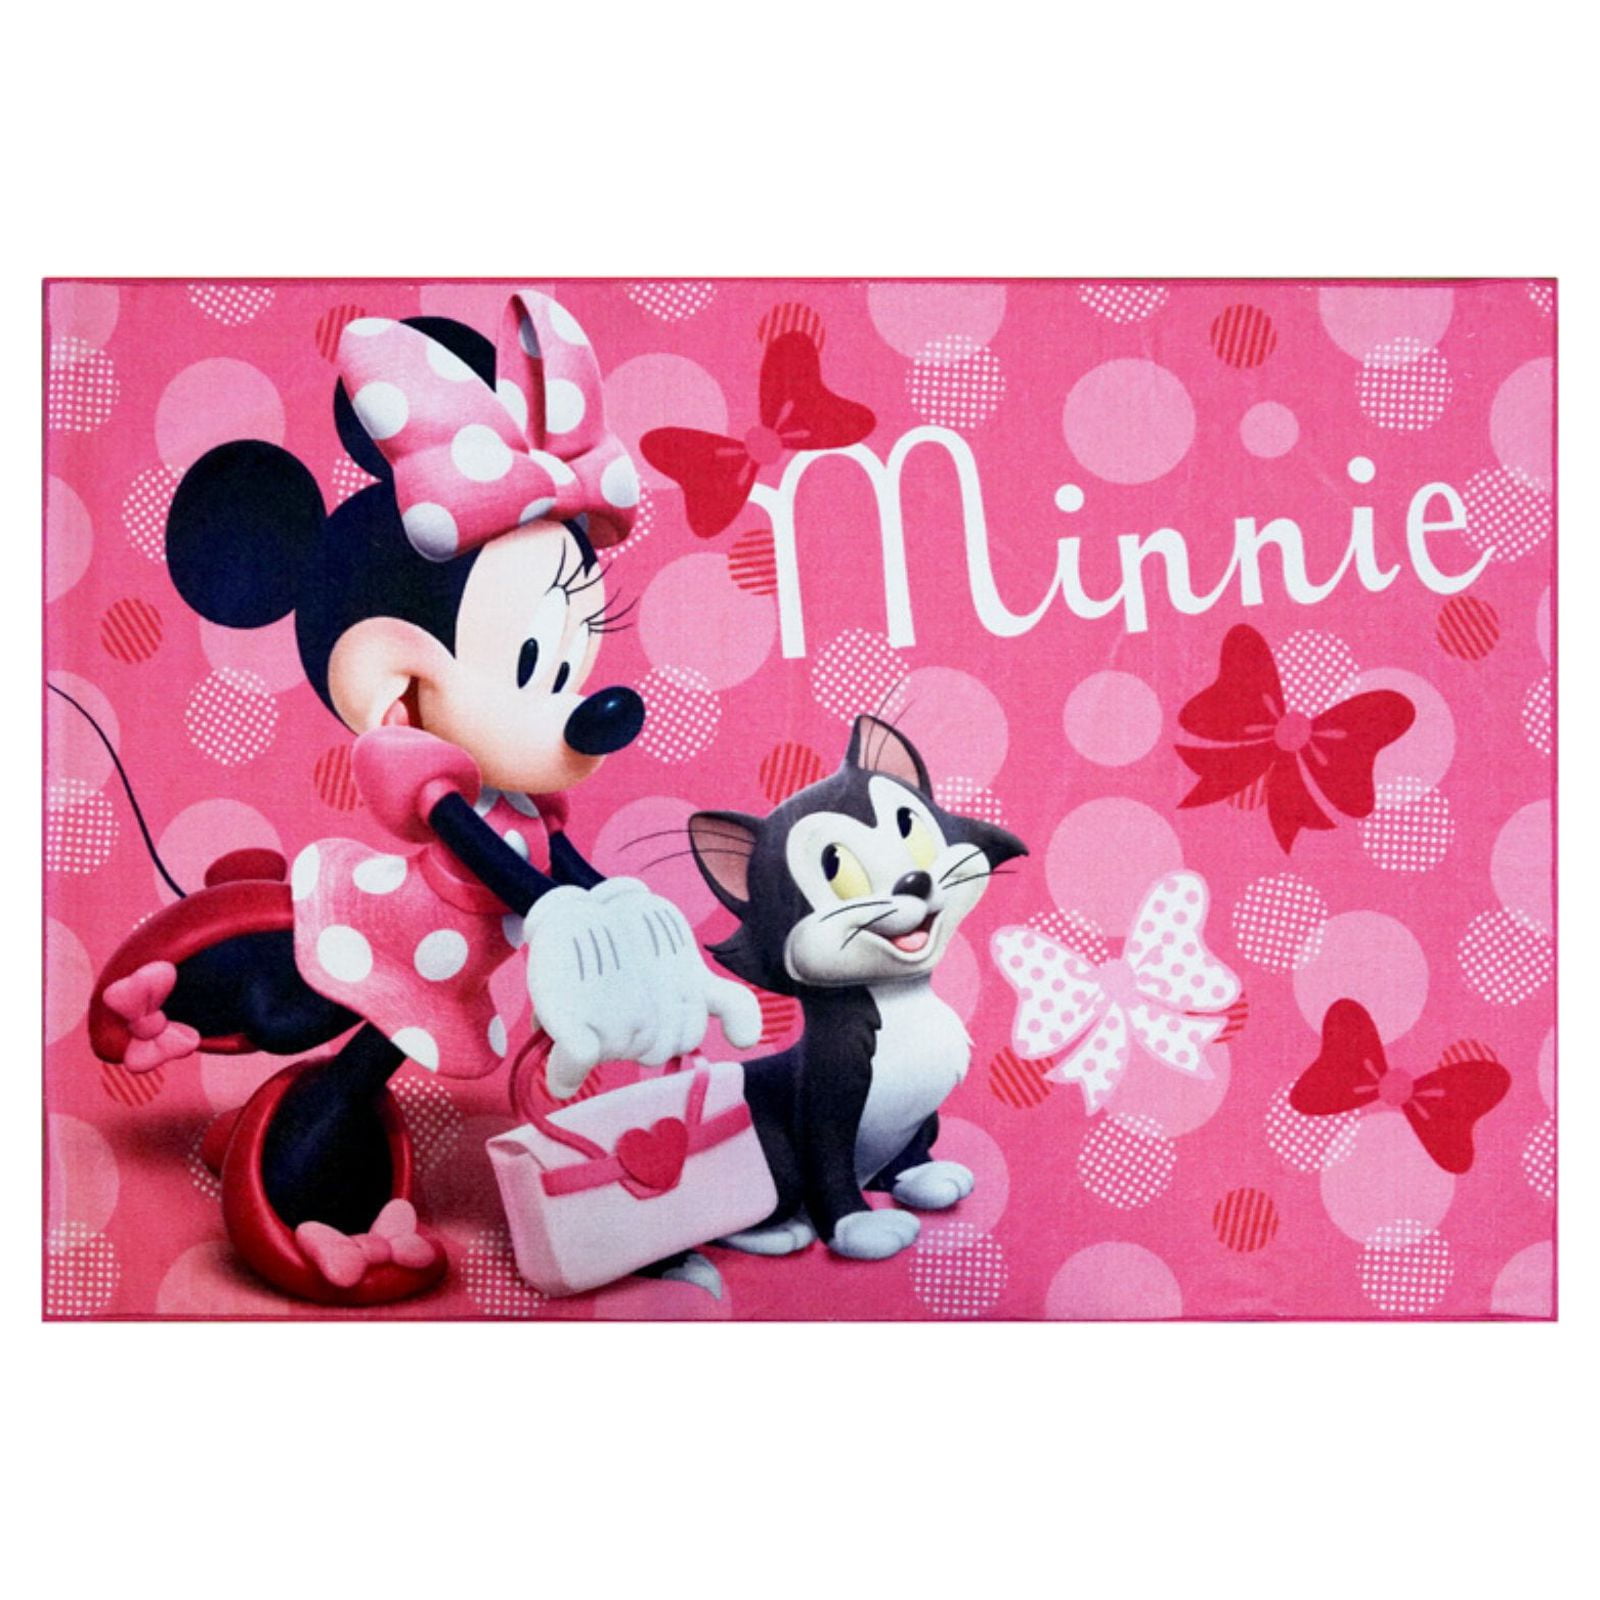 Gucci minnie mouse disney luxury area rug for living room bedroom carpet  home decorations mat type 4